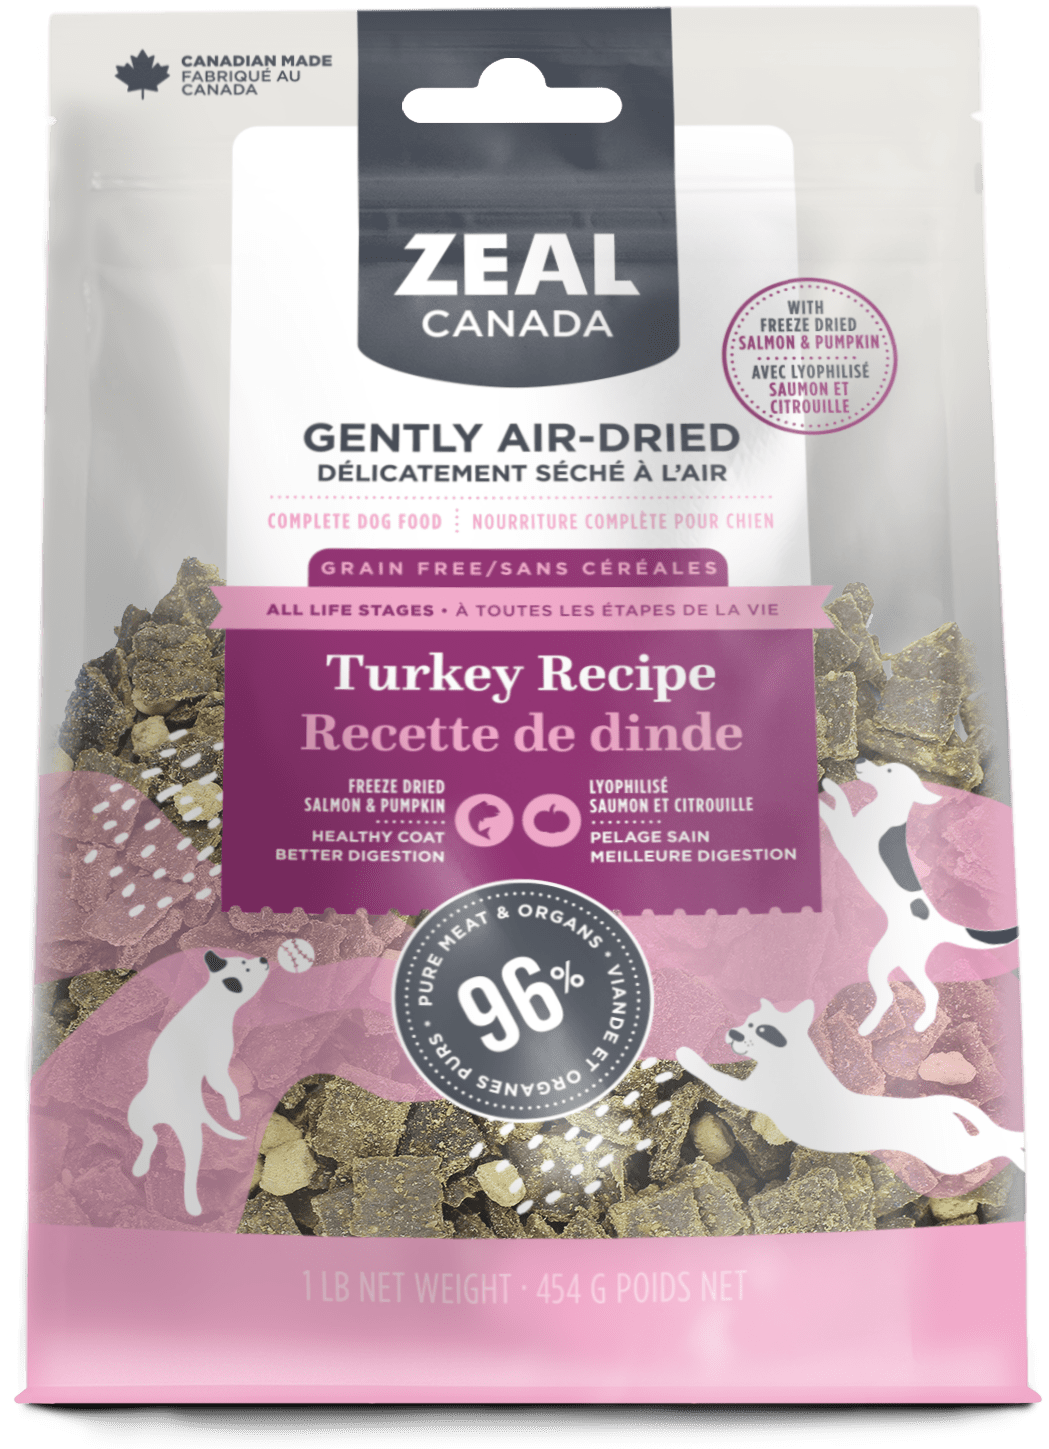 Zeal Canada - Gently Air-Dried Turkey with Freeze-Dried Salmon & Pumpkin for Dogs